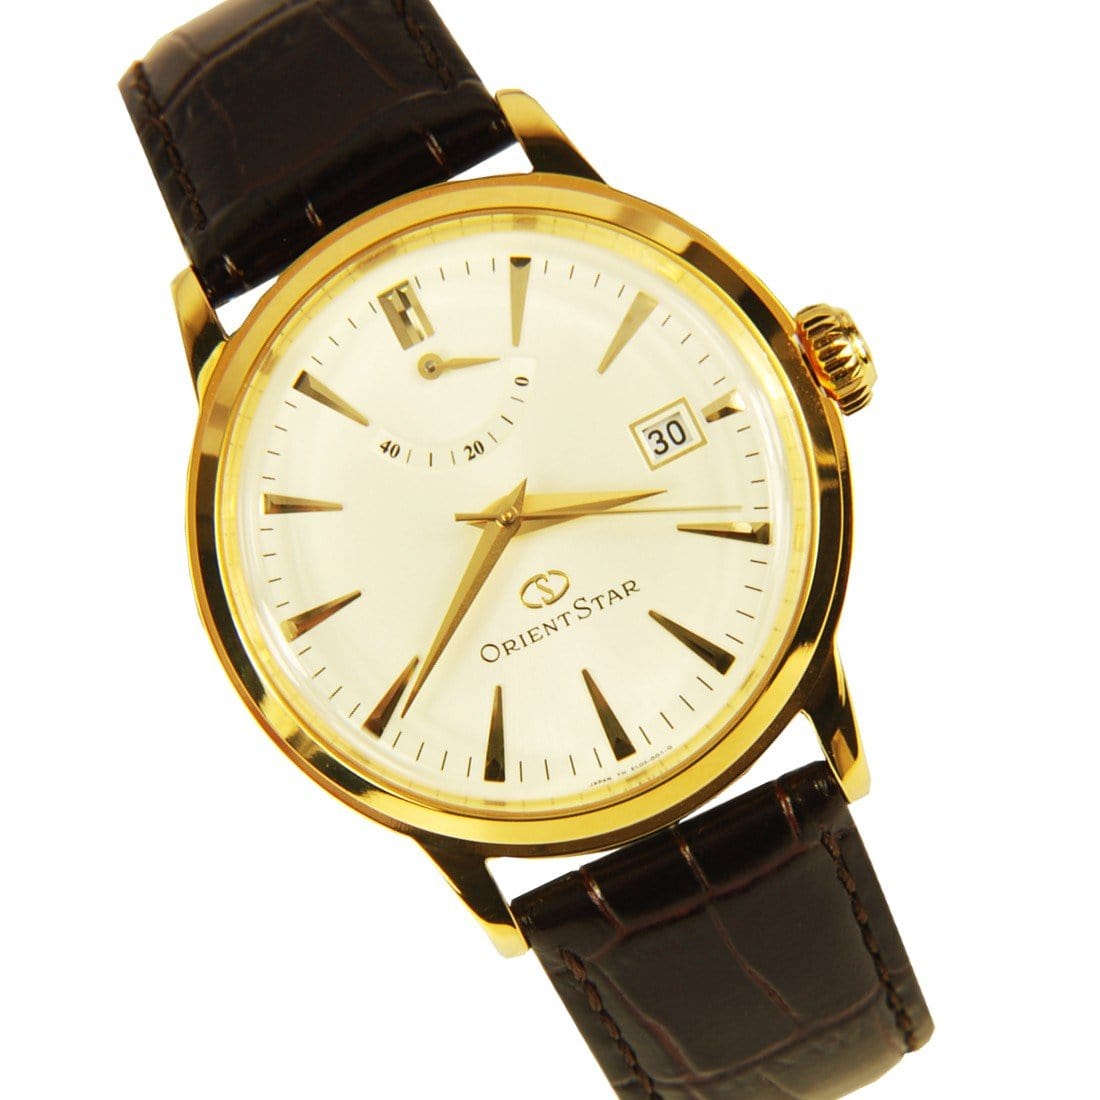 Orient Star Automatic Male Watch EL05001S SEL05001S0